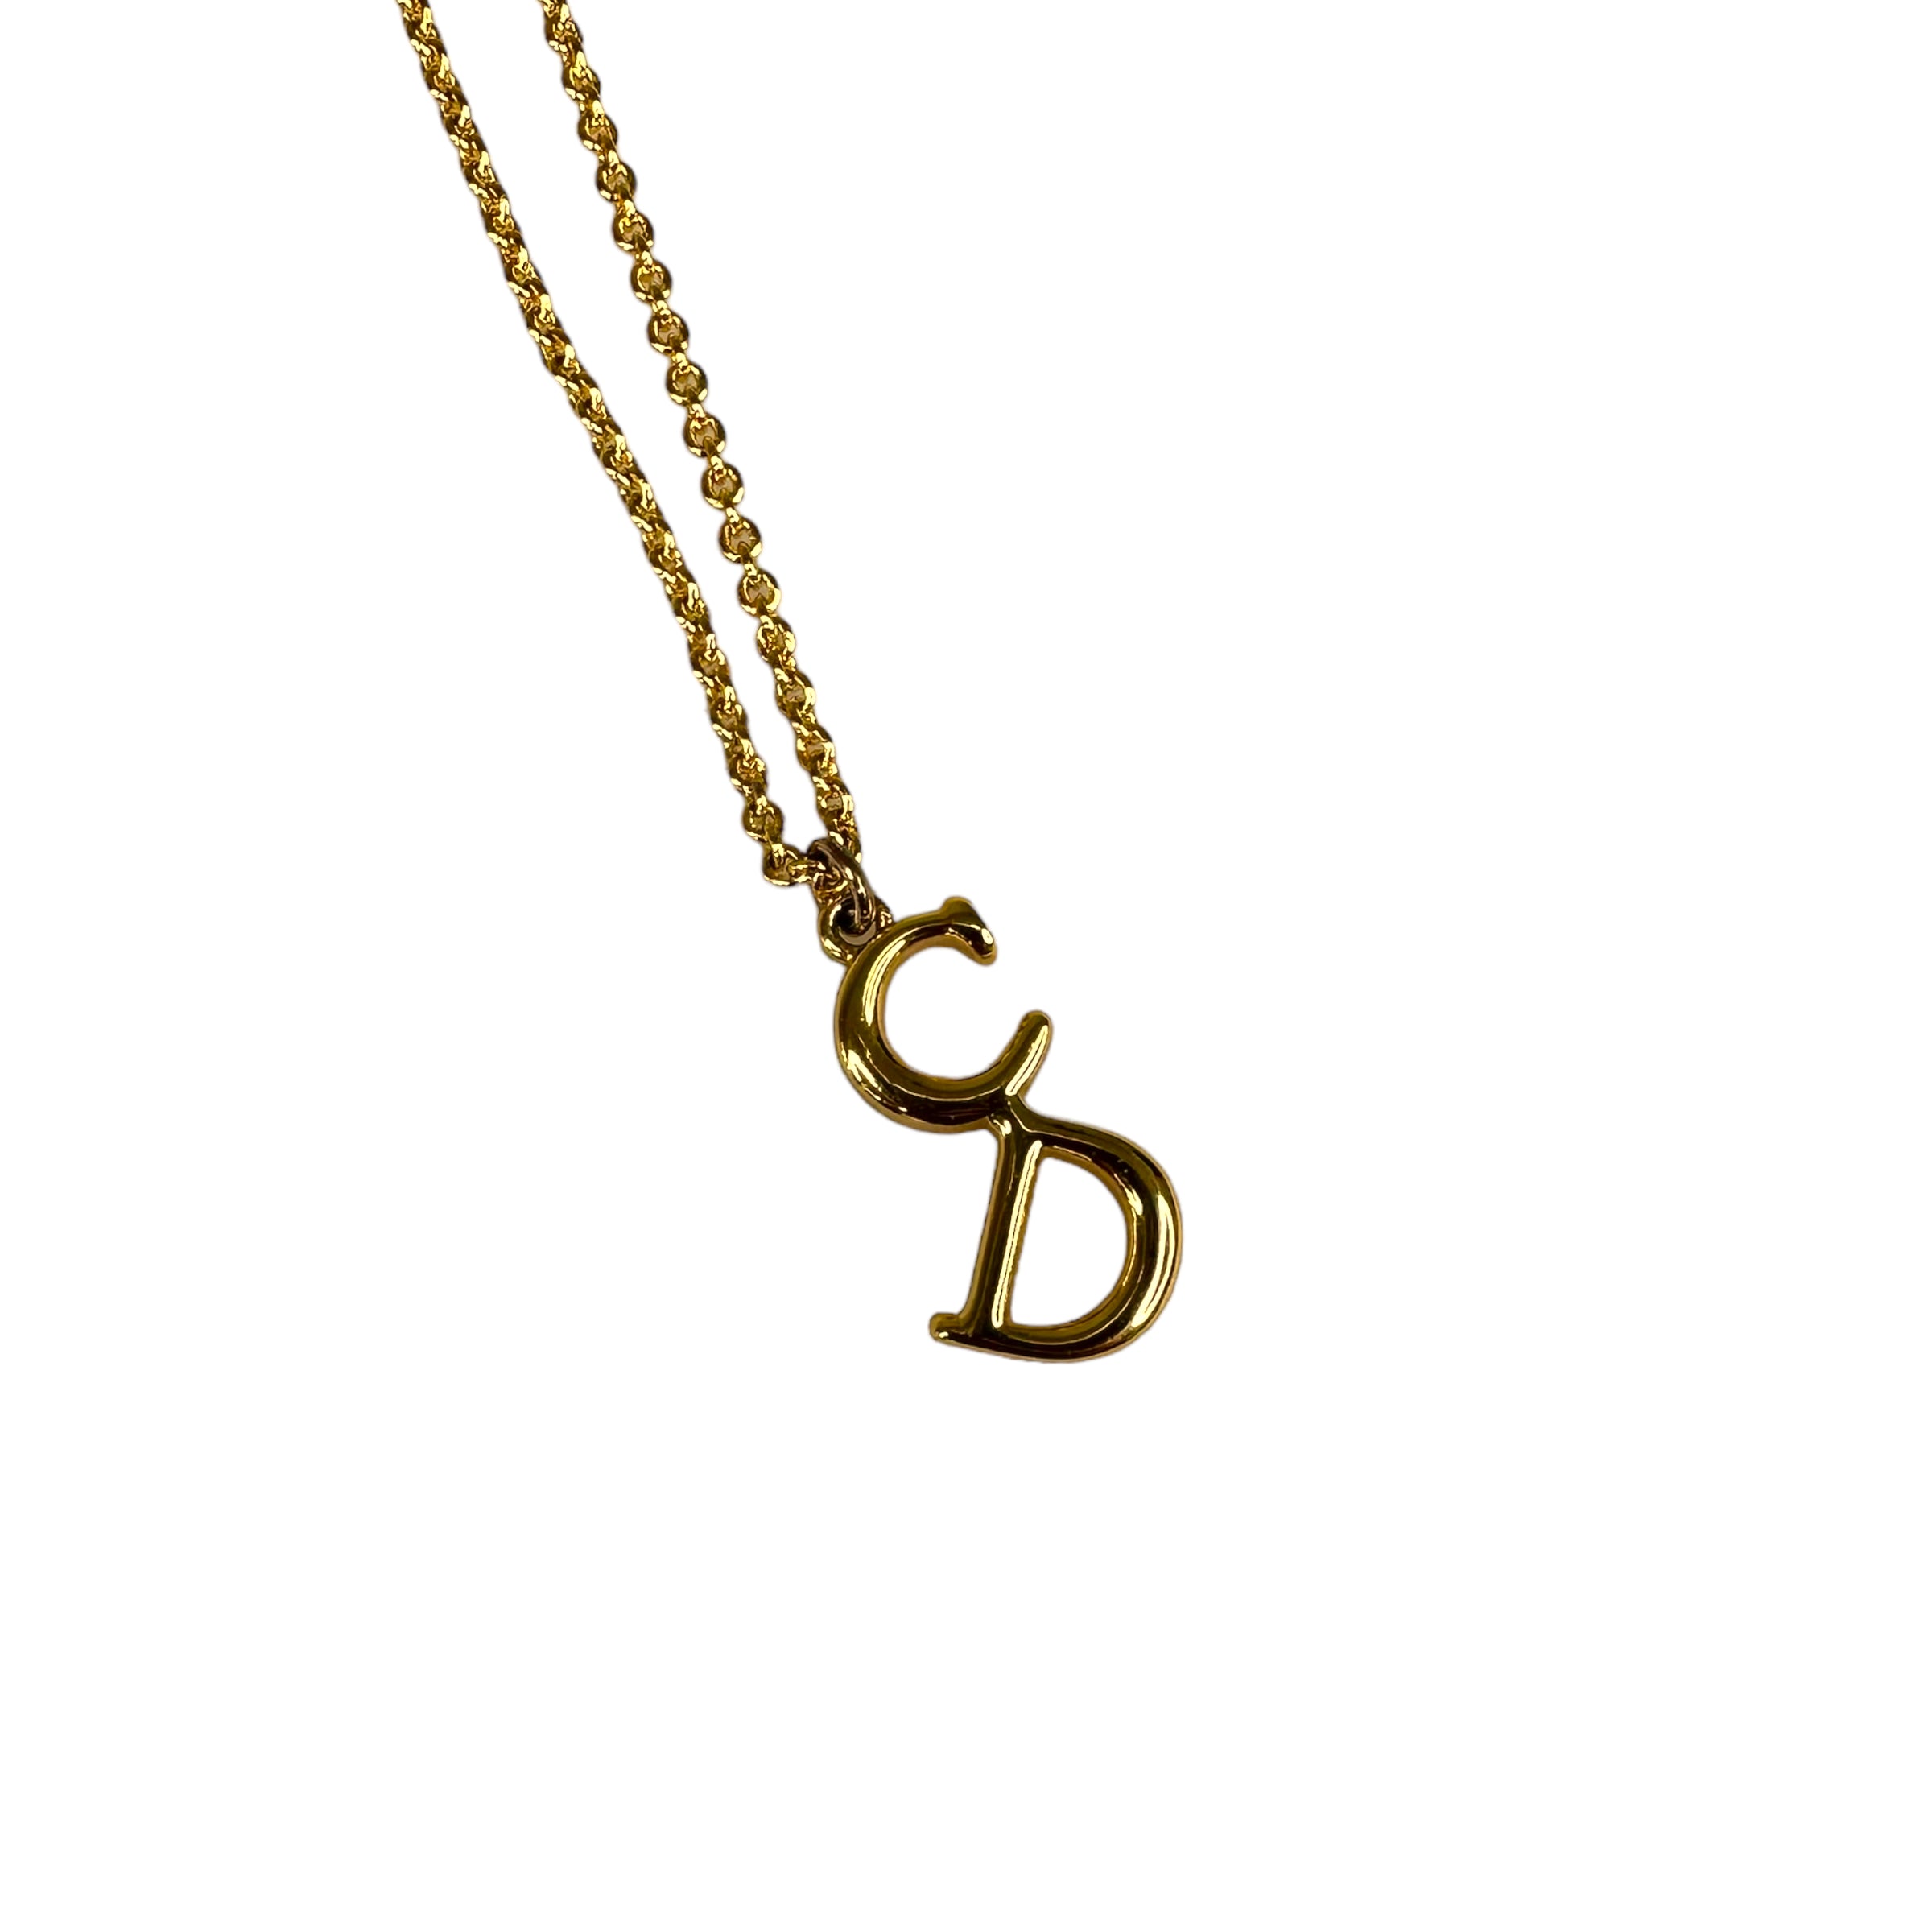 DIOR "CD" NECKLACE GOLD-PLATED